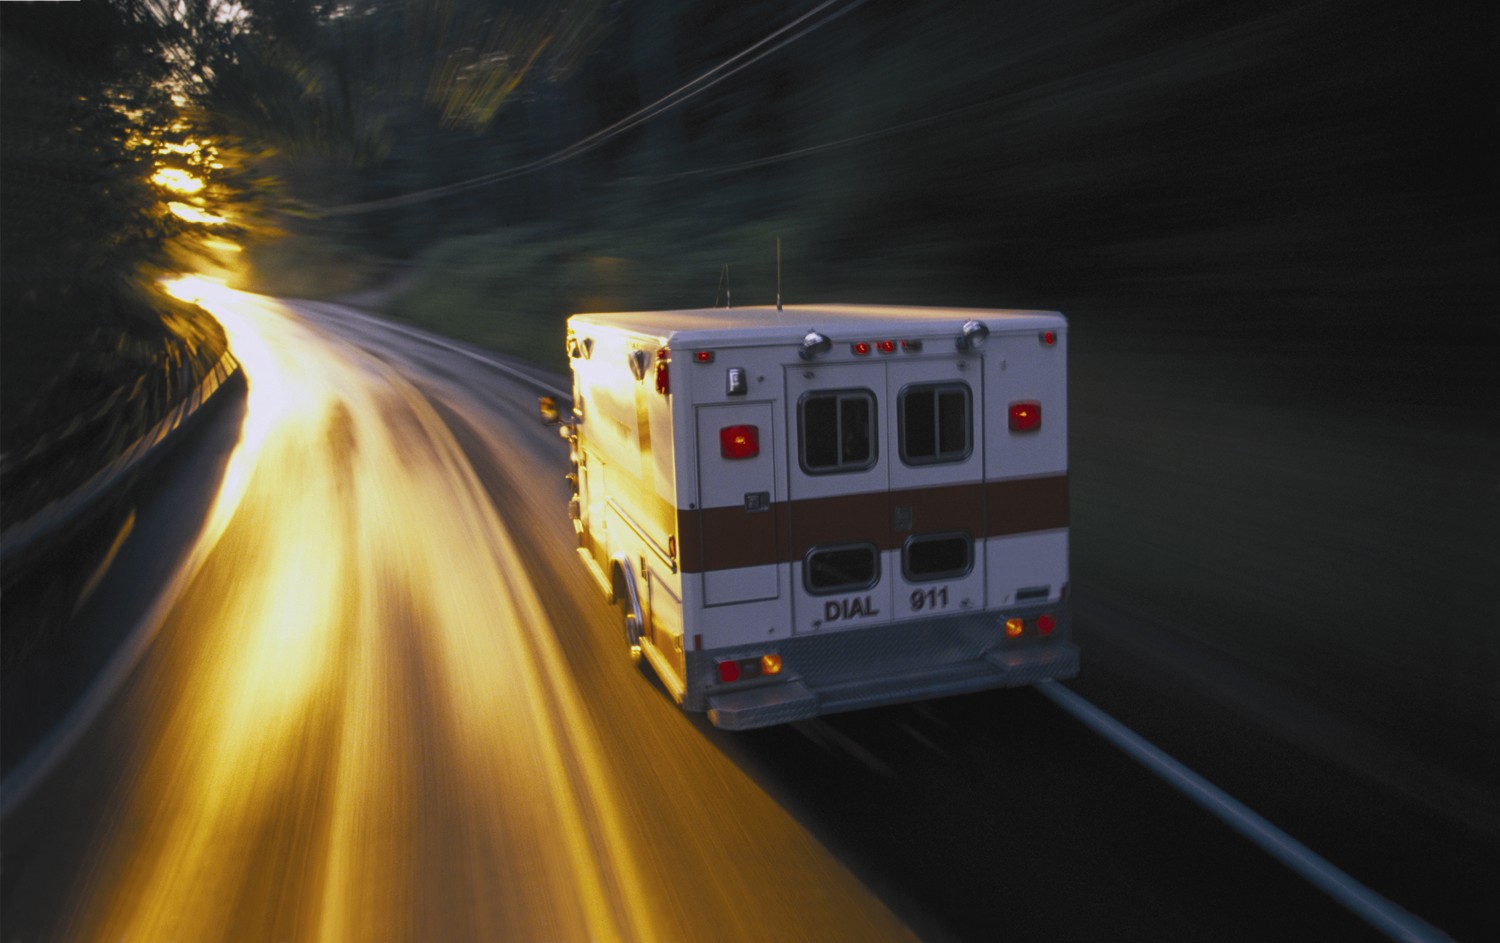 Digitech’s mission is to support EMS providers